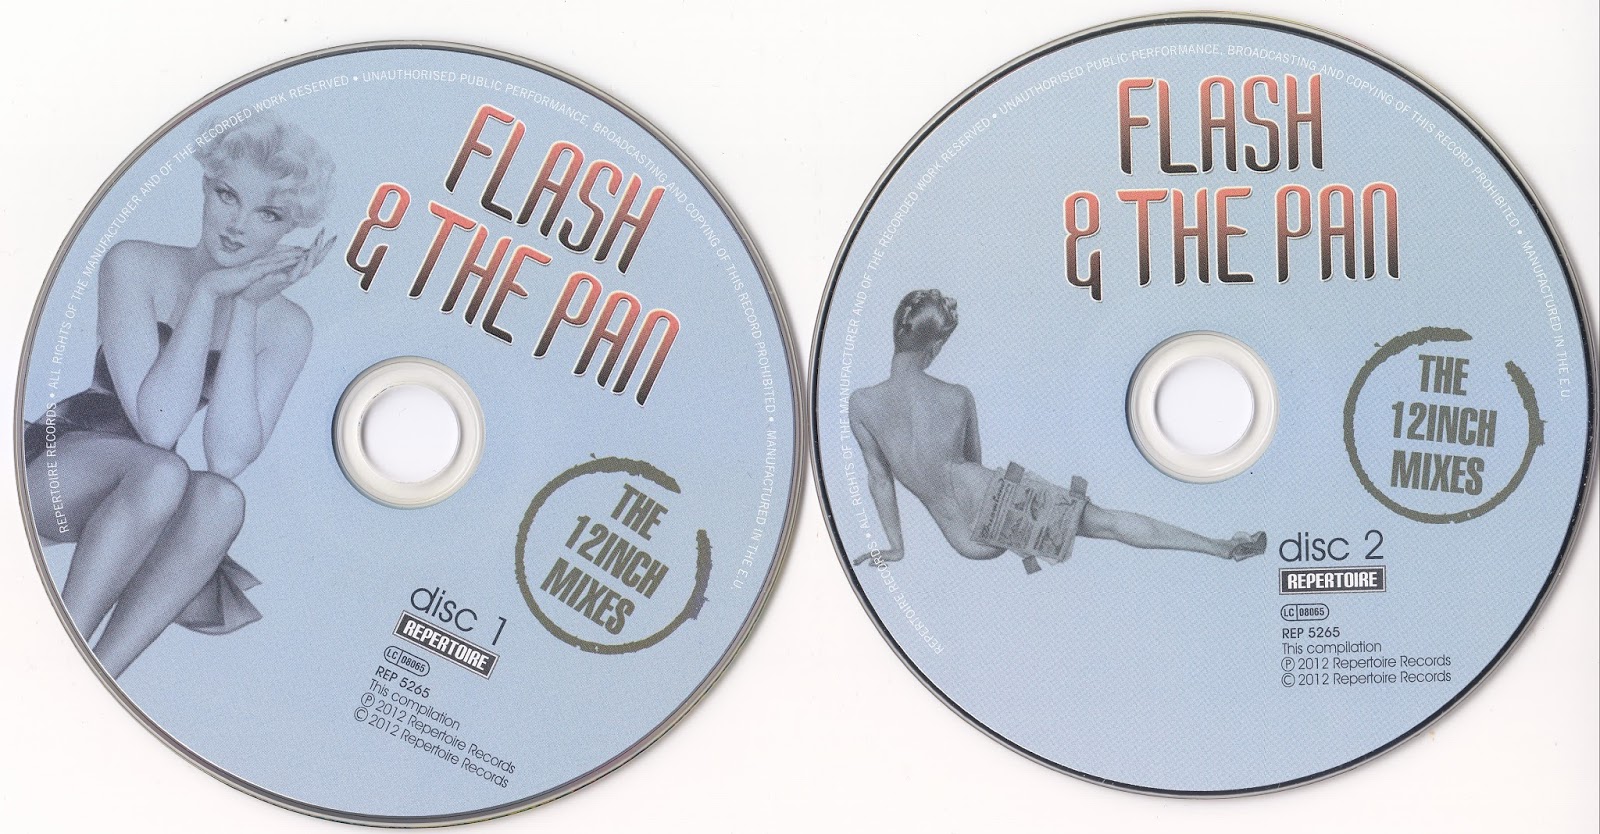 Flash and the Pan 1978. Flash and the Pan - Midnight man. Shakatak the 12 inch Mixes.